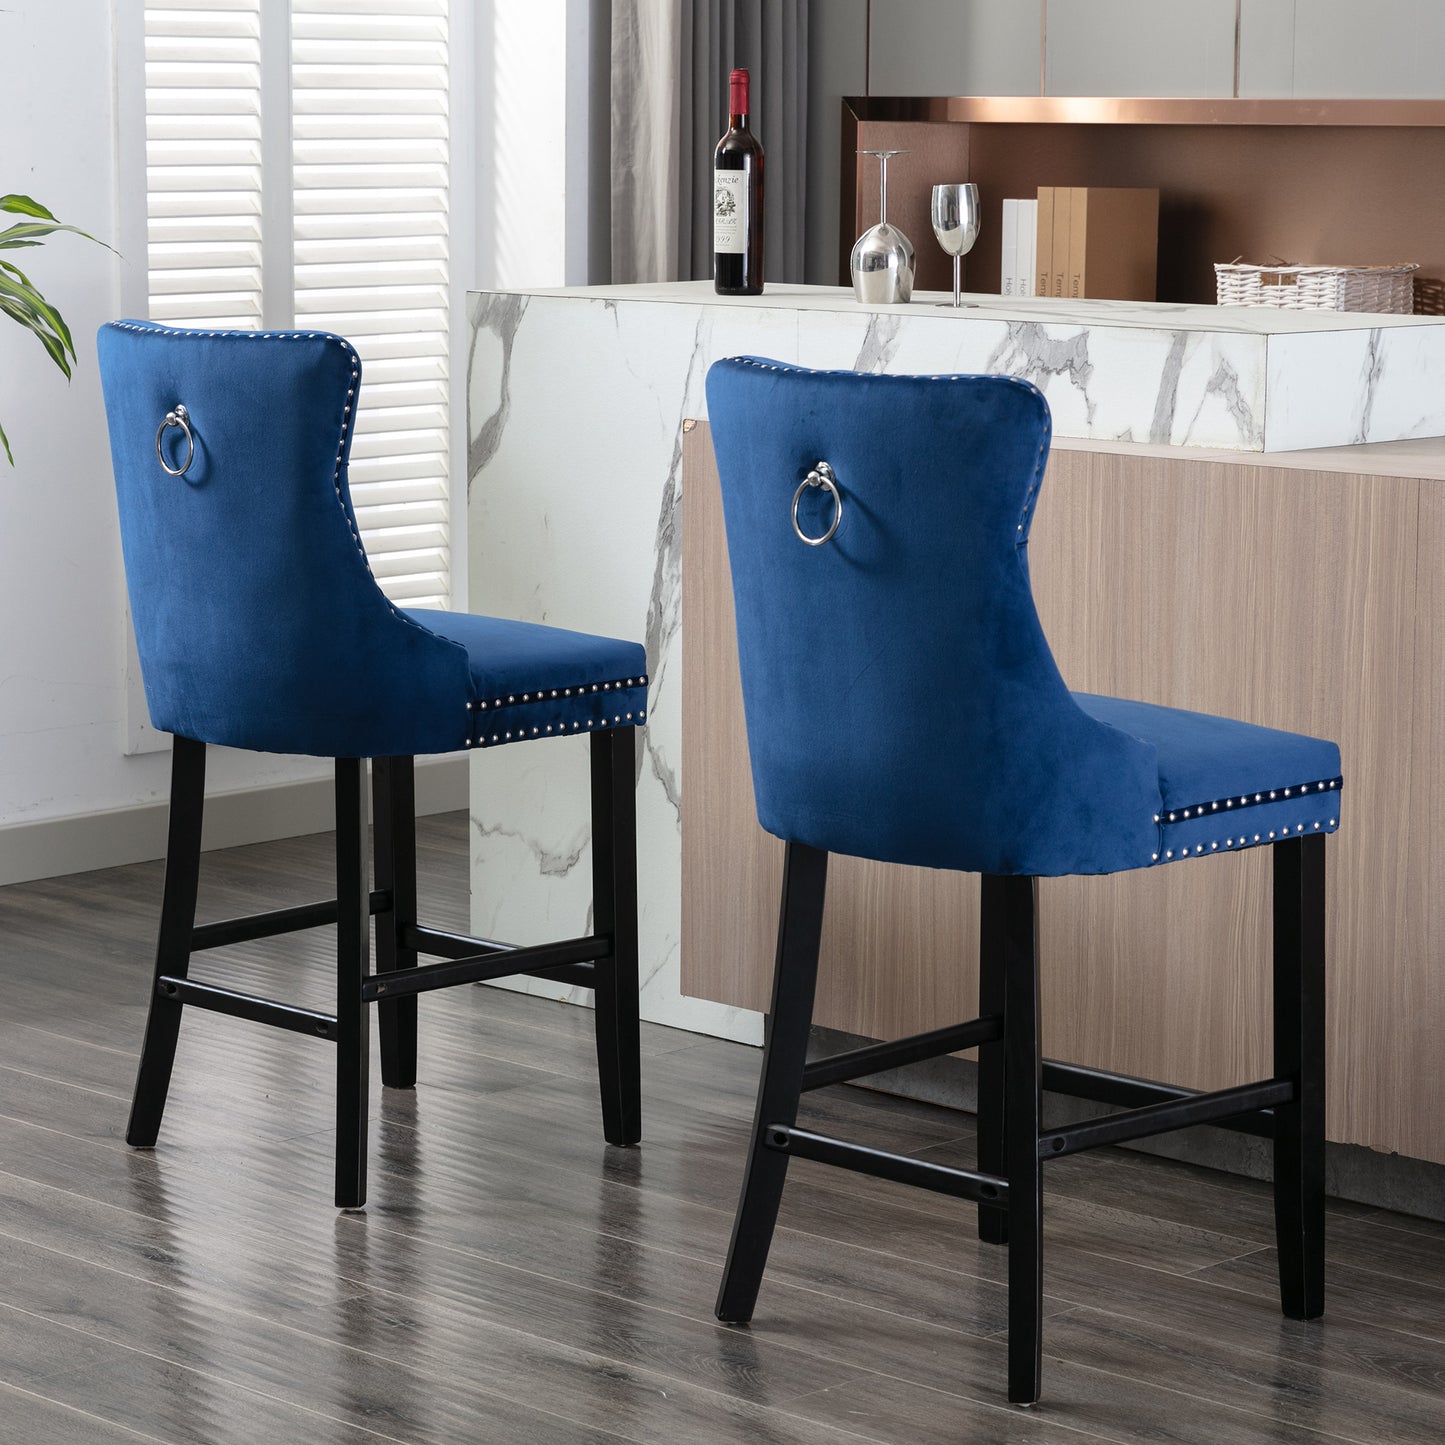 SYNGAR Bar Stools Set of 2, Velvet Upholstered Bar Chair with Wood Legs Nailhead Trim Tufted Back, High End Counter Height Bar Stools, Bar Chairs for Bar Counter Kitchen, Wood Barstool Set, Blue